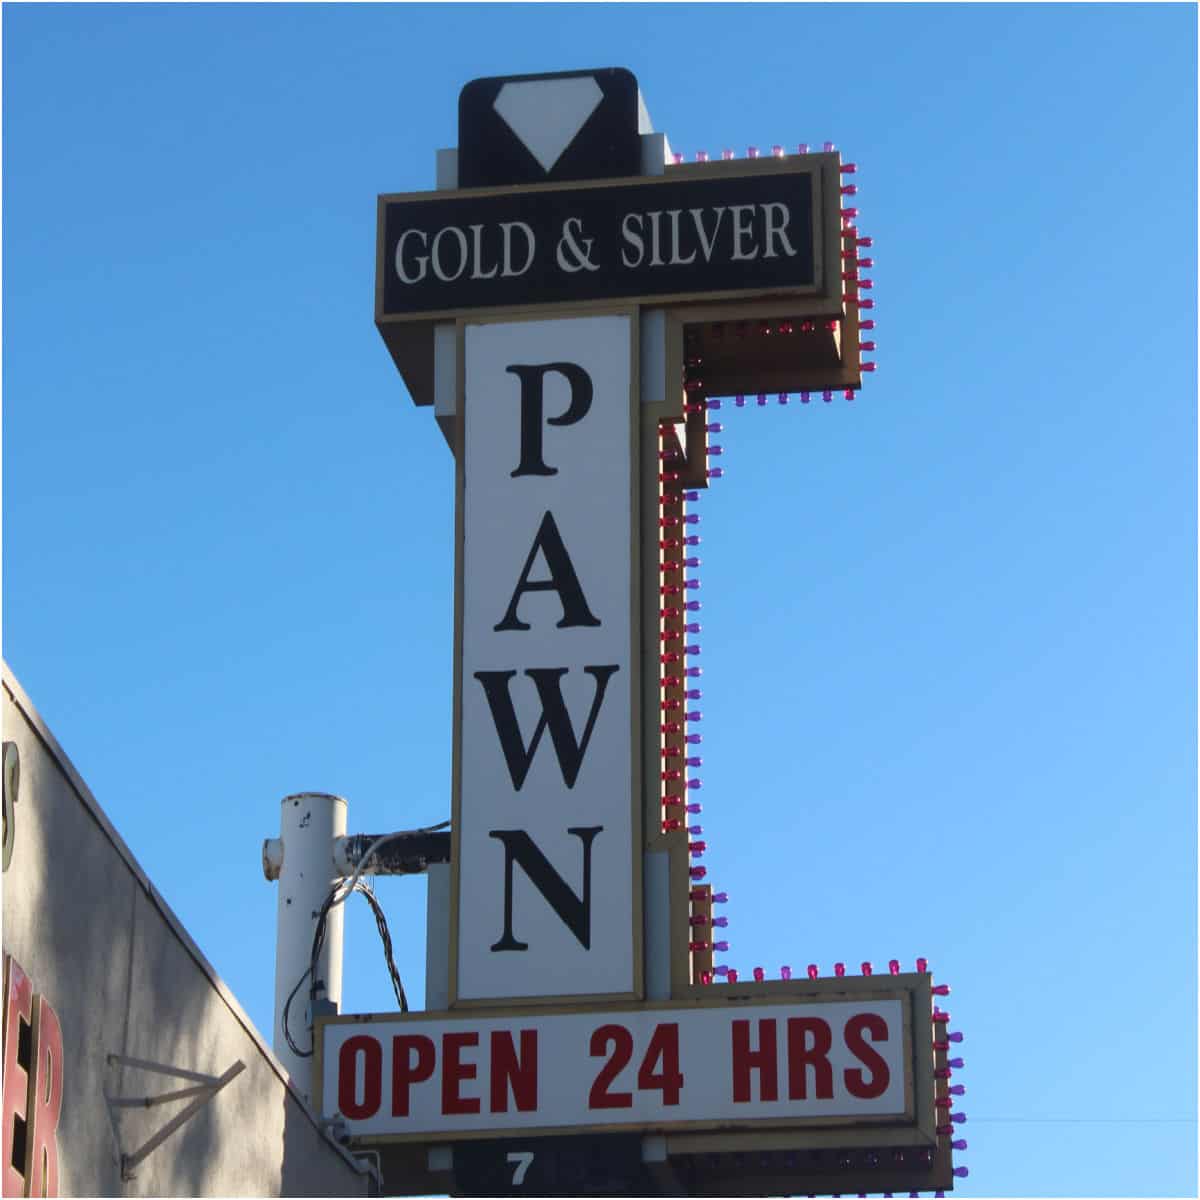 Gold & Silver Pawn Open 24 Hours sign